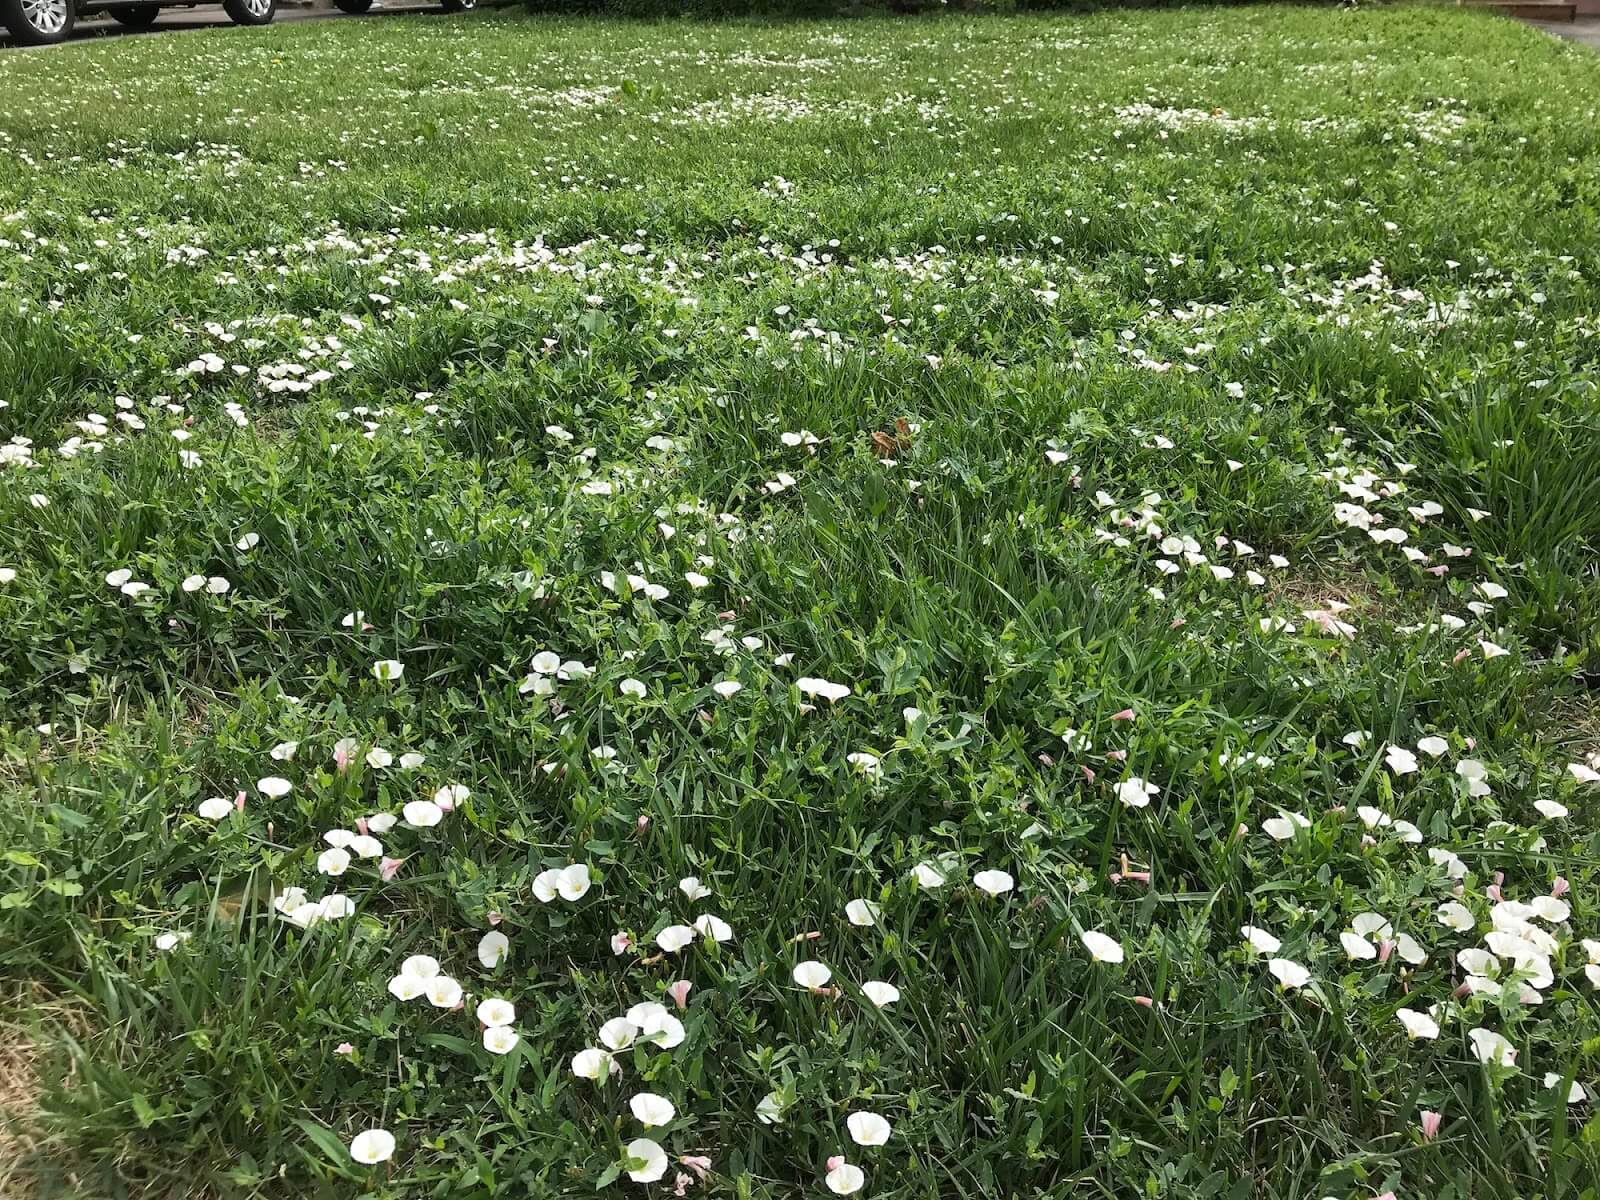 A lawn covered in weeds